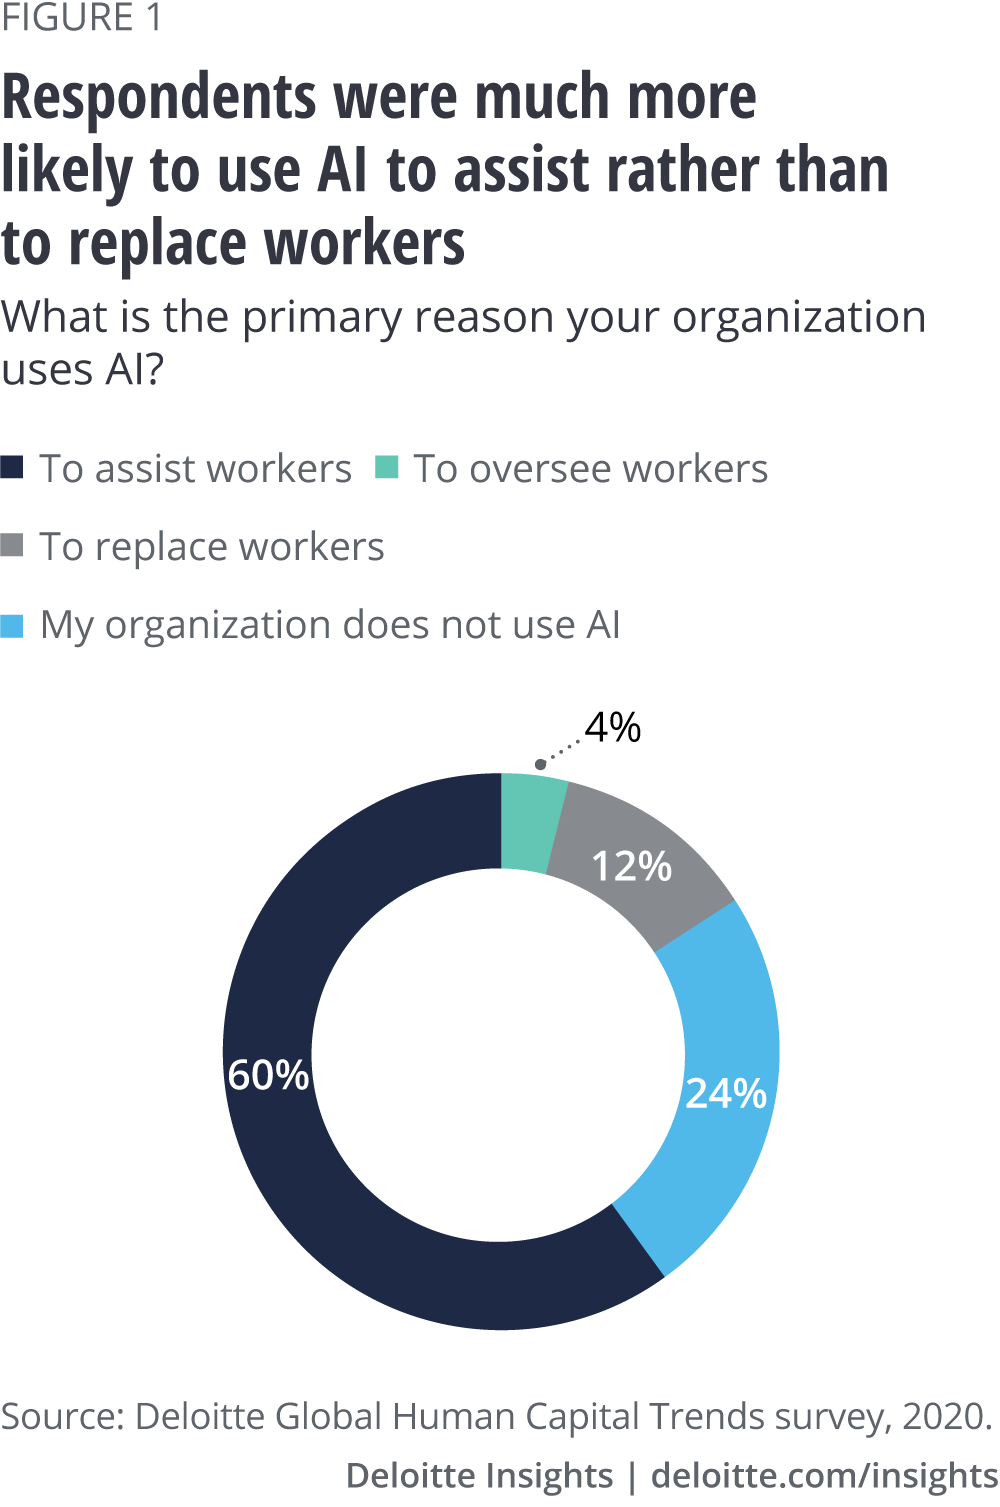 Respondents were much more likely to use AI to assist rather than to place workers